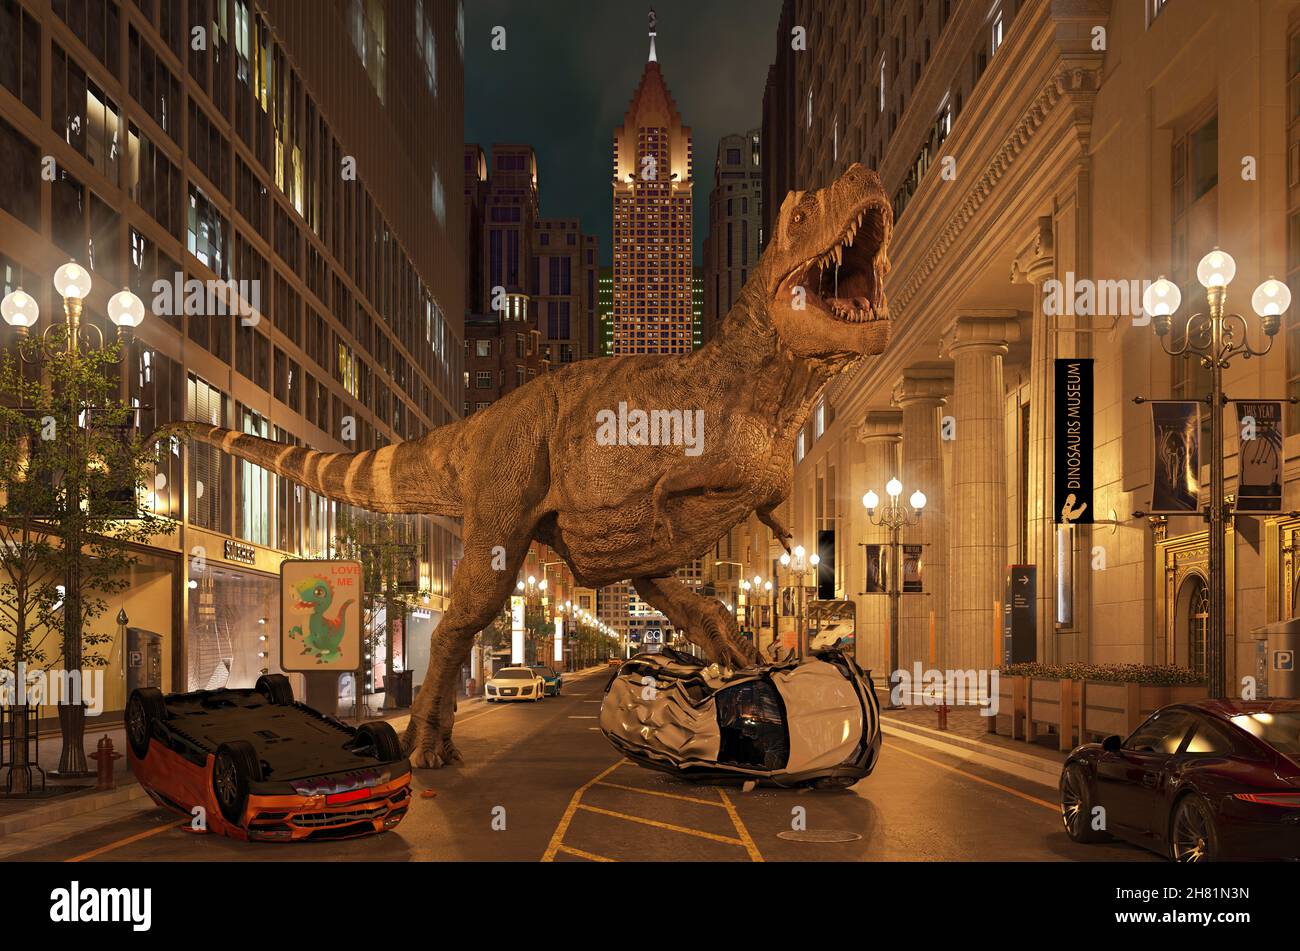 T-Rex dinosaur roaring in the street destroying cars with skyscrapers environment at night time. Stock Photo